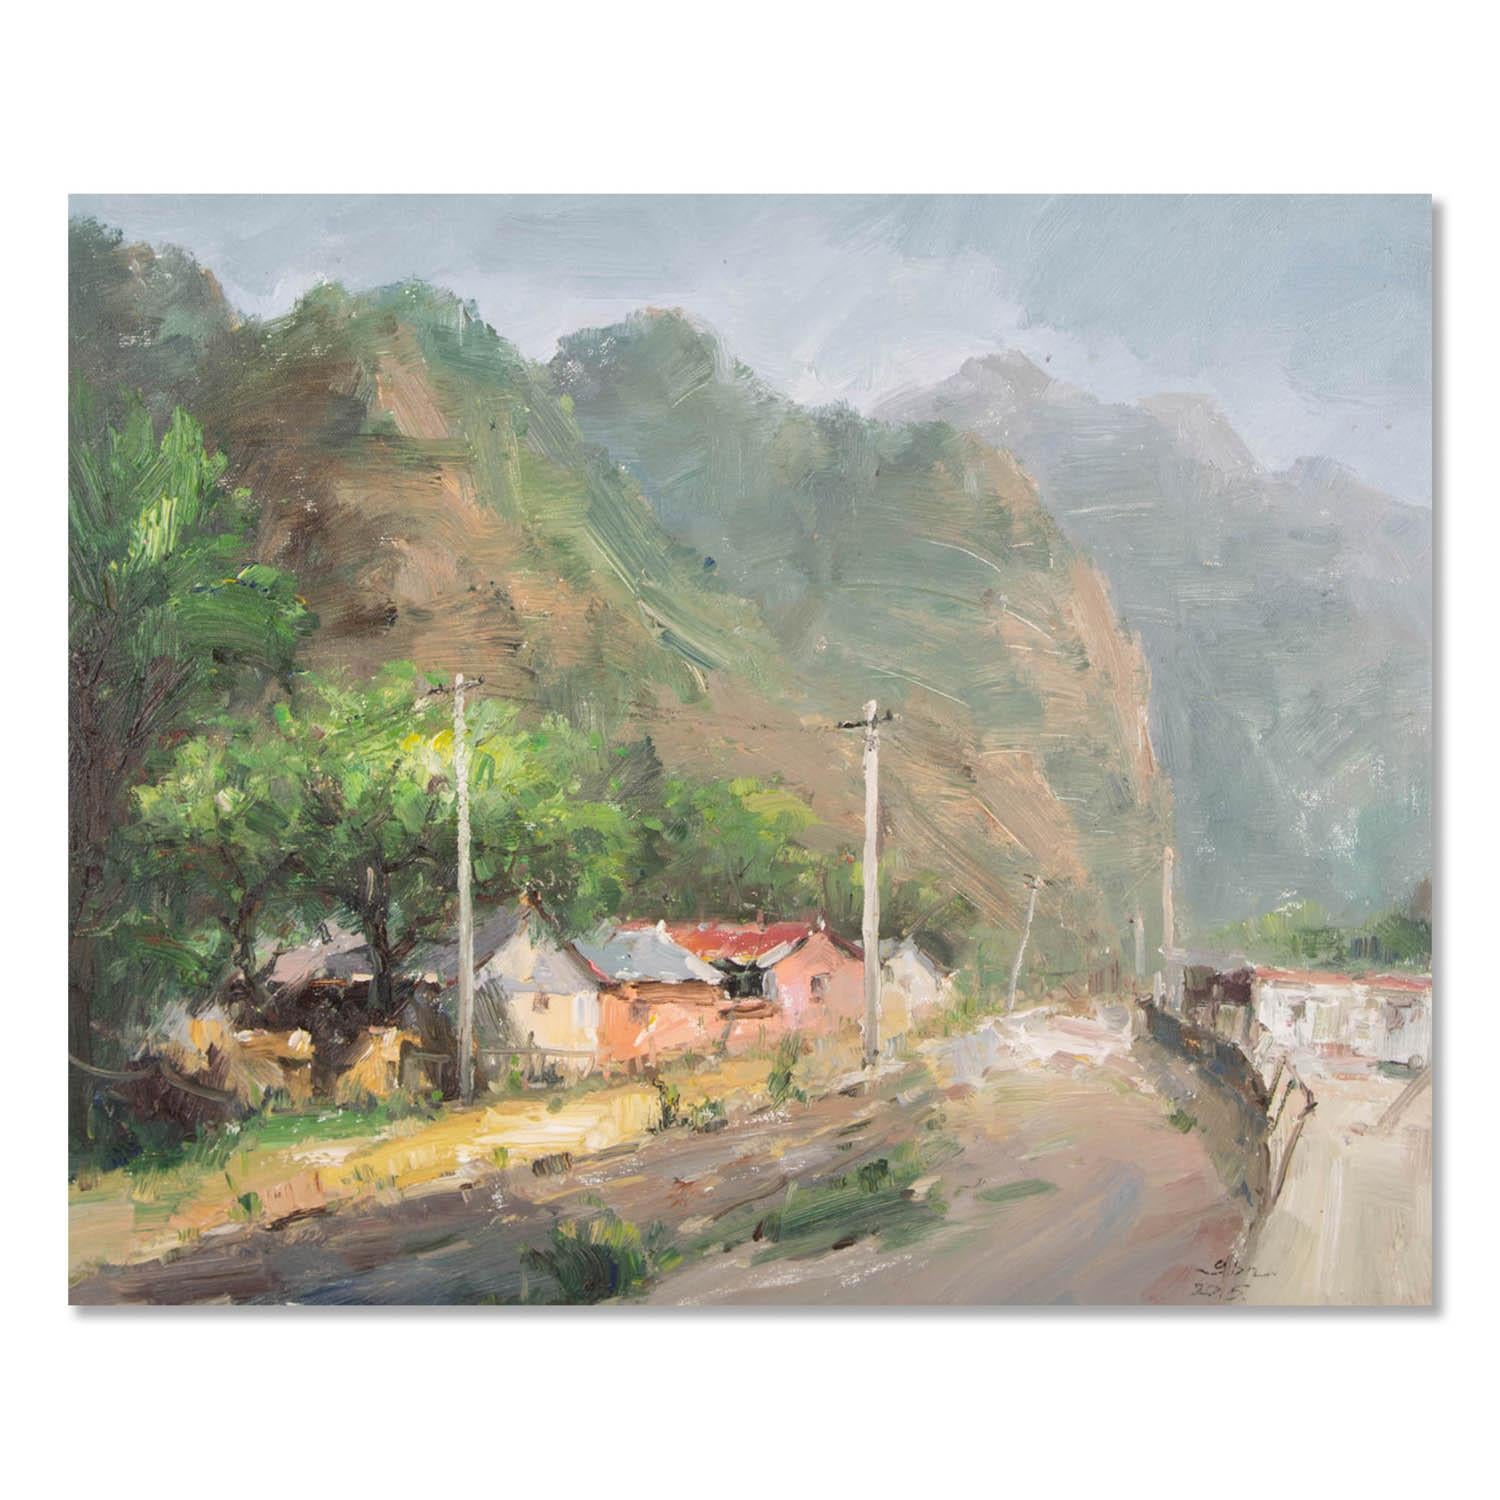  Title: Village
 Medium: Oil on canvas
 Size: 18.5 x 22.5 inches
 Frame: Framing options available!
 Condition: The painting appears to be in excellent condition.
 
 Year: 2015
 Artist: Bihua Gong
 Signature: Signed
 Signature Location: Lower right
